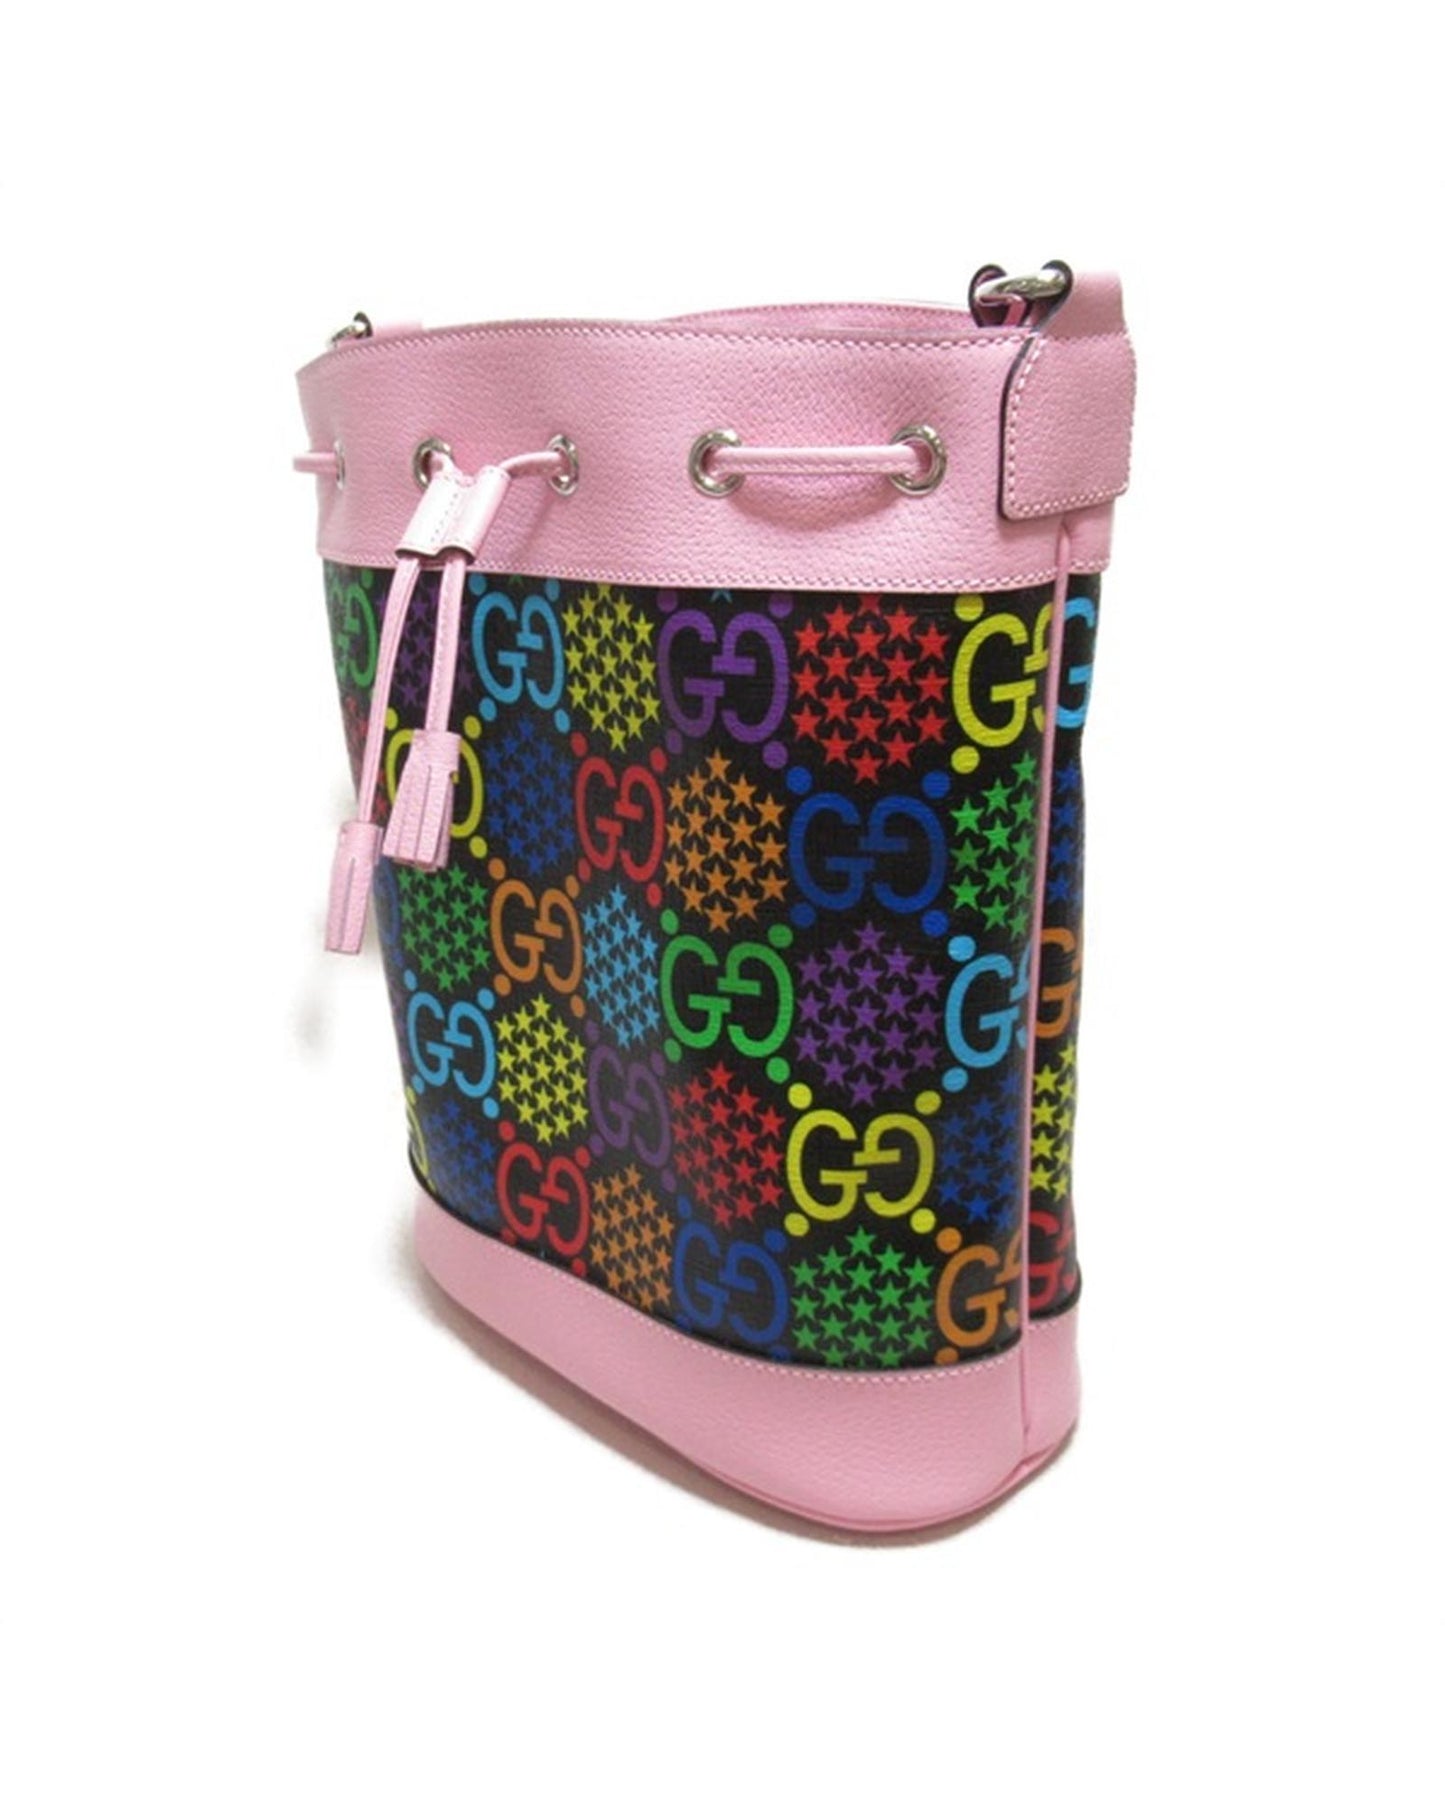 Gucci Women's Psychedelic Bucket Bag in Print in Pink